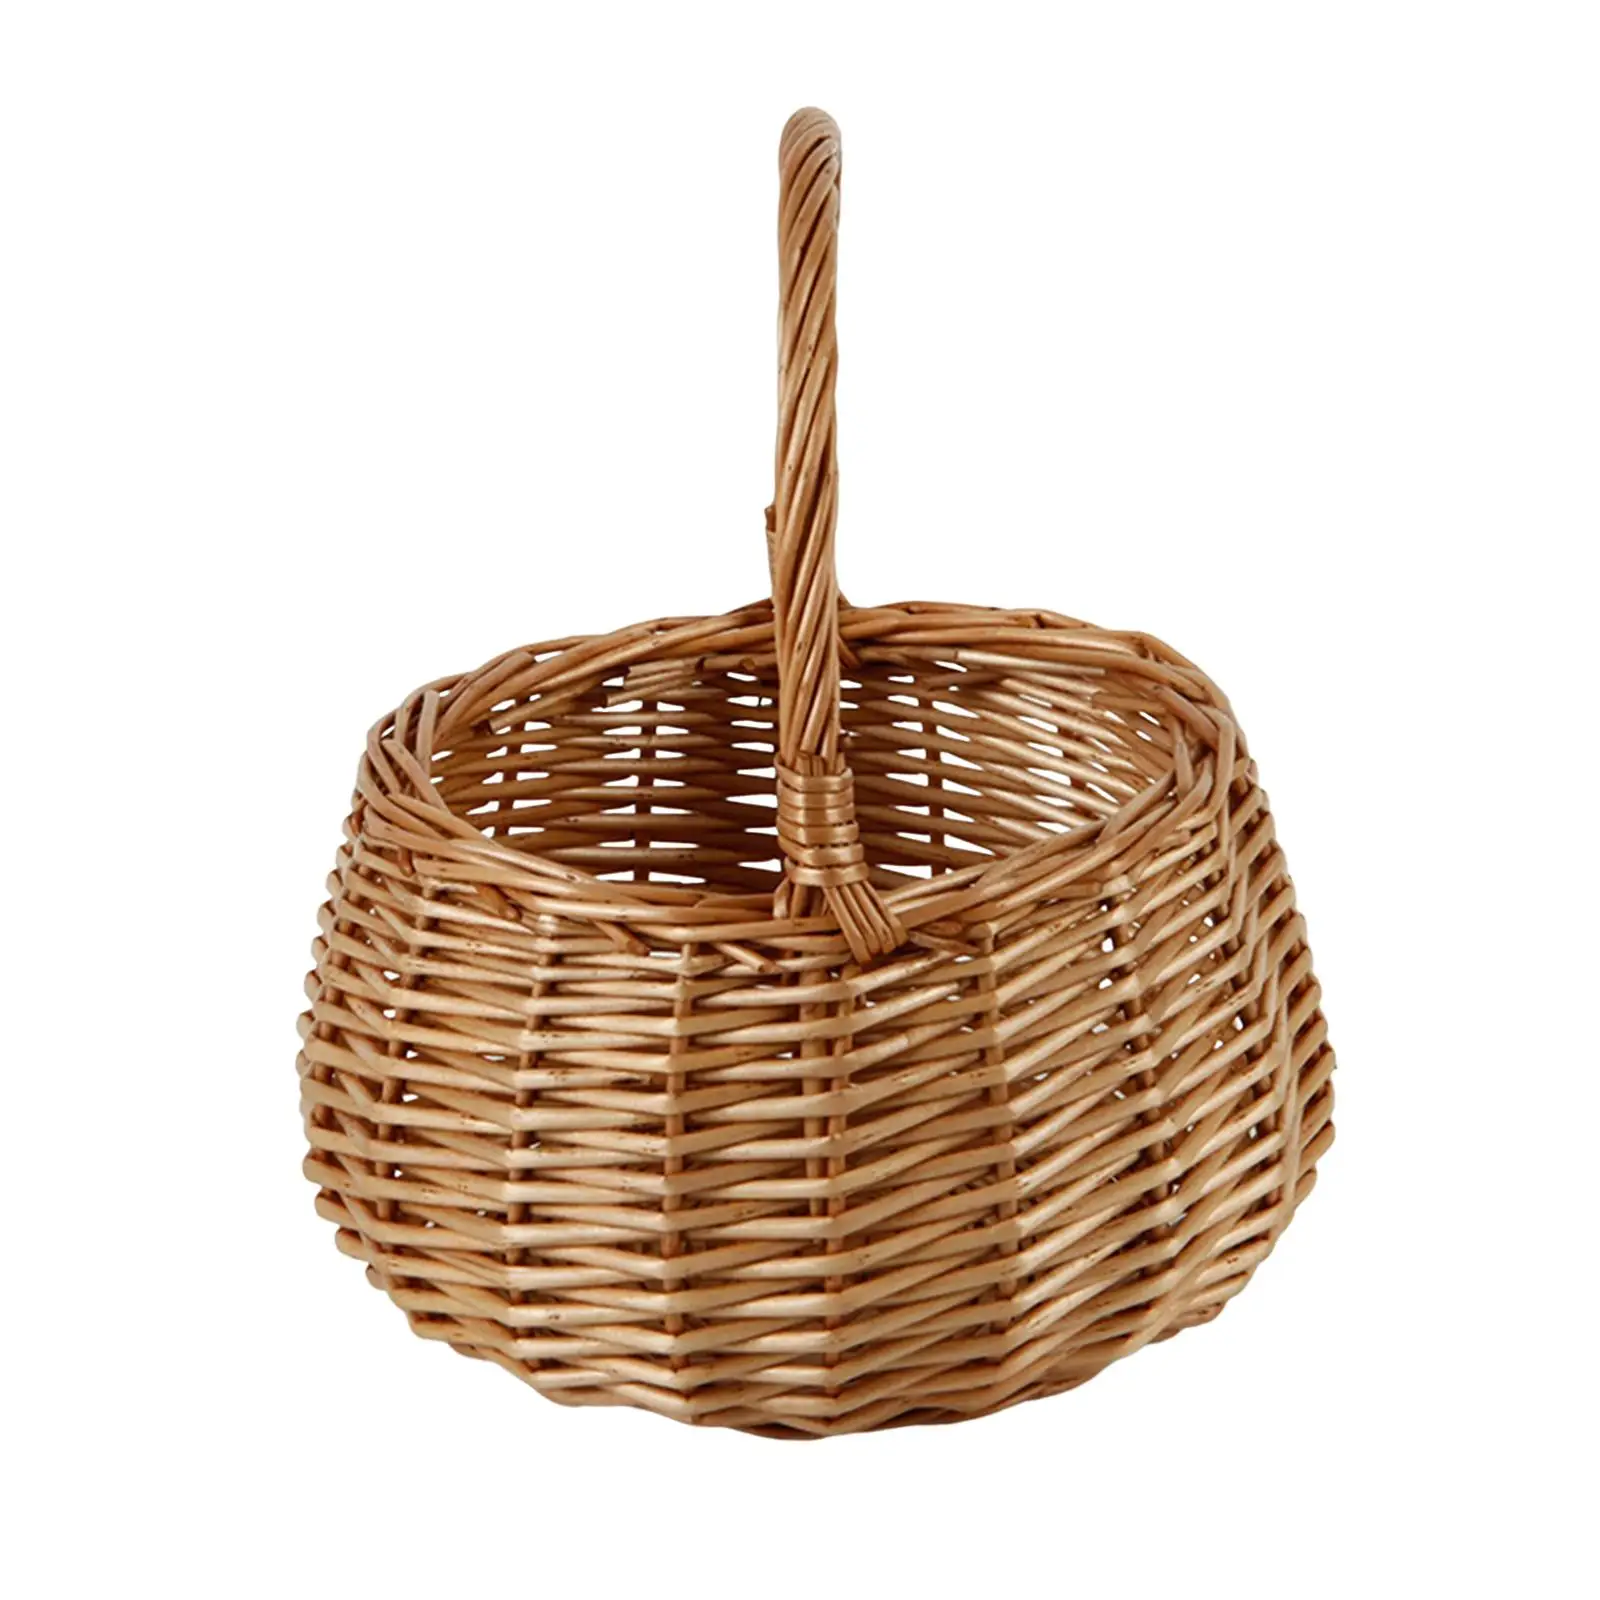 Wicker Storage Baskets Portable Crafts Shopping Basket Picking Basket Sturdy Hand Woven for Flower Bread Fruit Vegetable Picnic